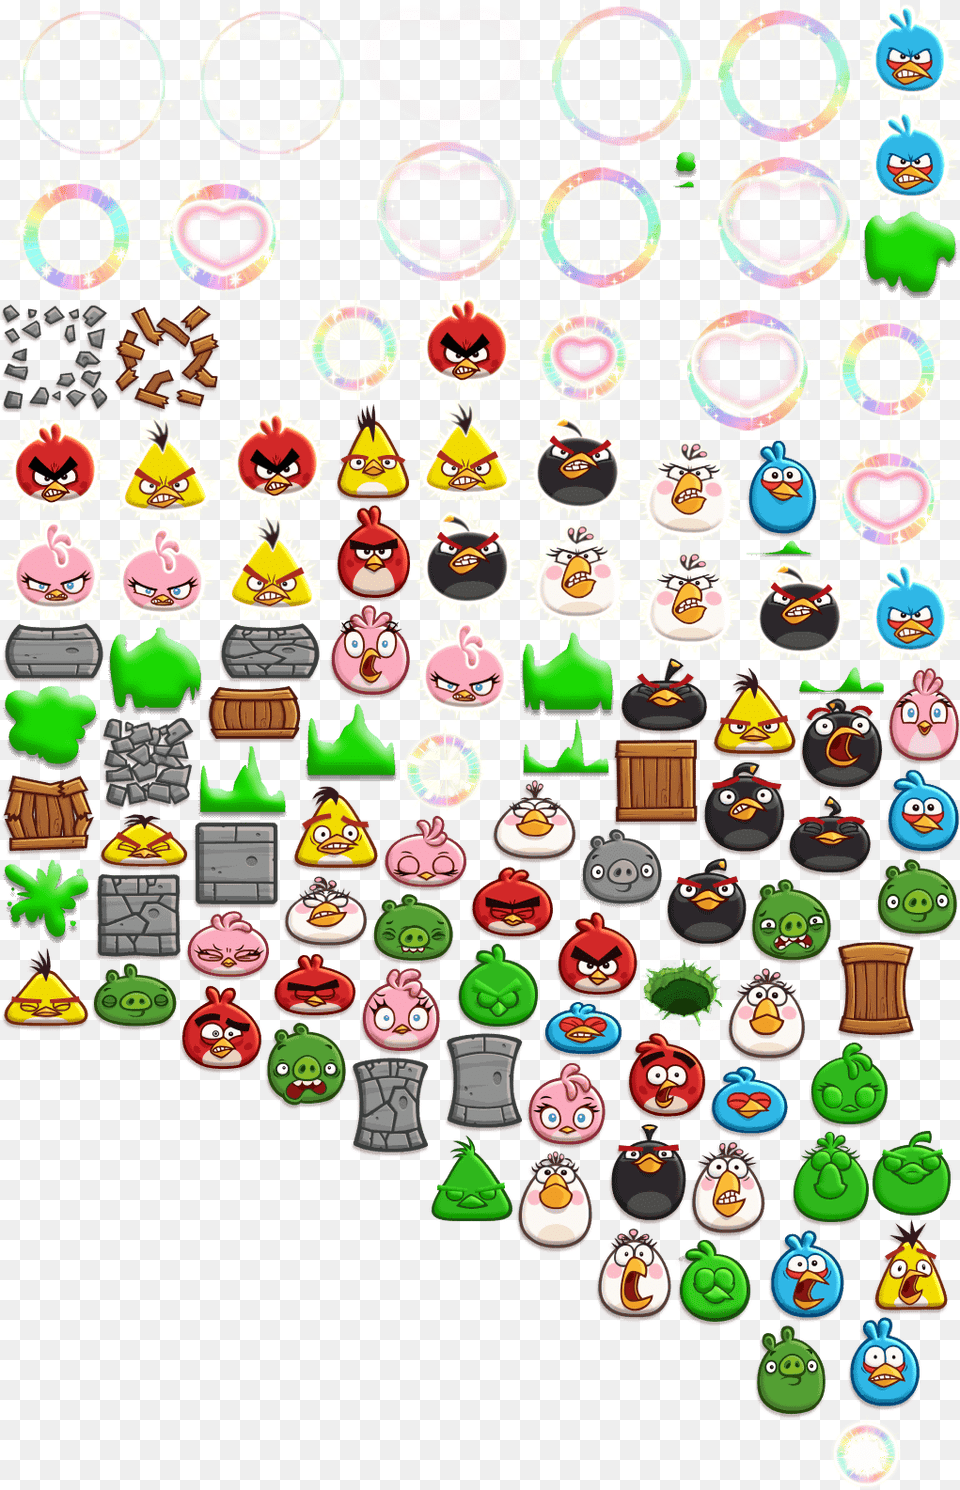 Angry Birds Fight Sprites Angry Birds Fight Panels, Food, Cream, Icing, Dessert Png Image